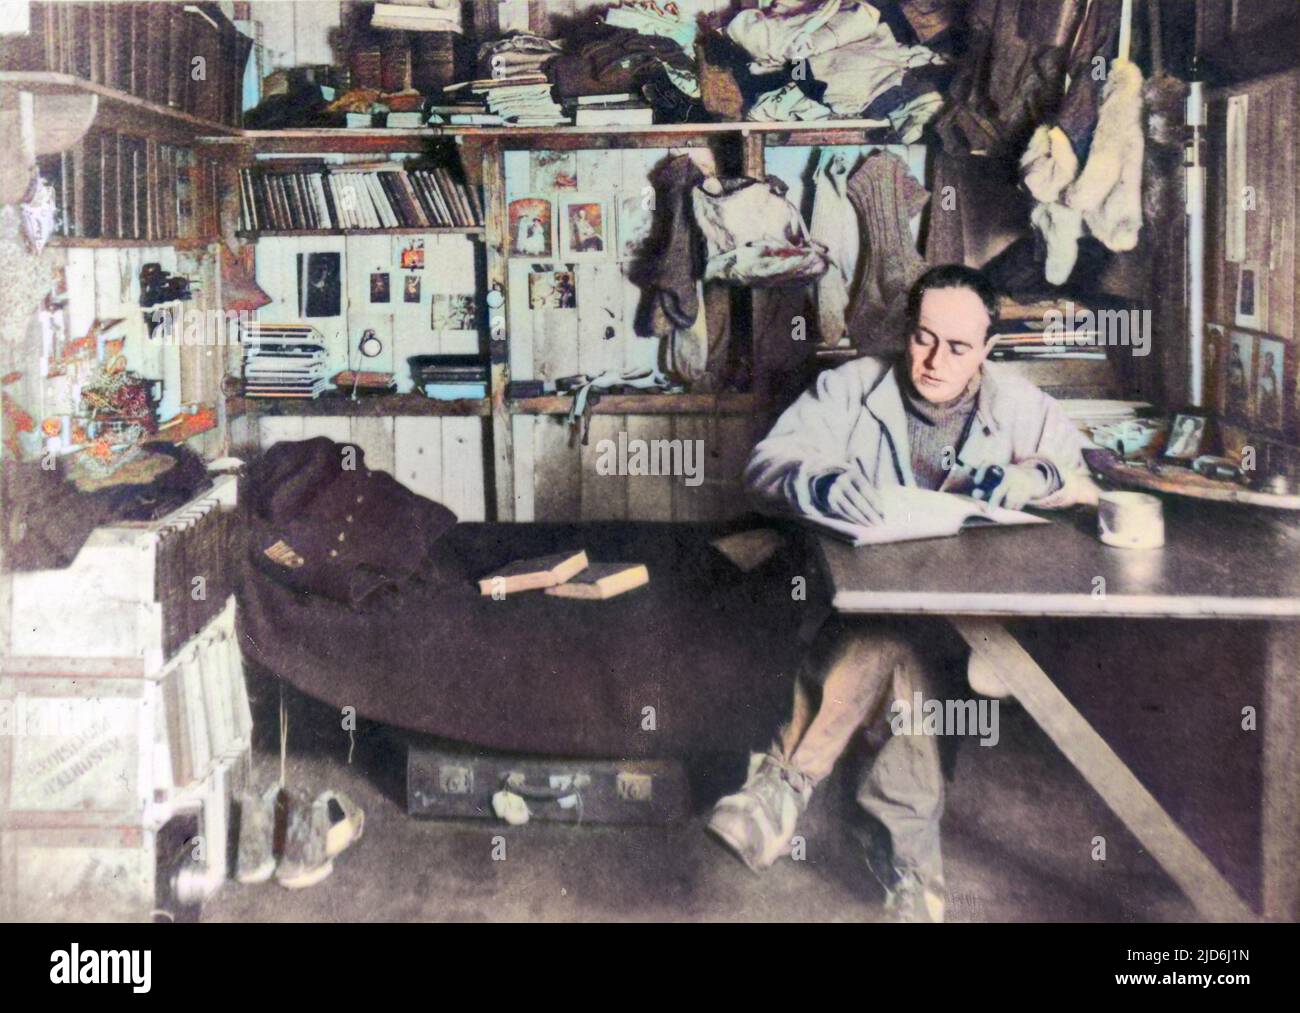 Captain Robert Falcon Scott (1868 - 1912), British polar explorer and leader of the ill-fated expedition to the South Pole in 1912, pictured in his work room on board the Terra Nova. Colourised version of: 10419298       Date: 1911 Stock Photo